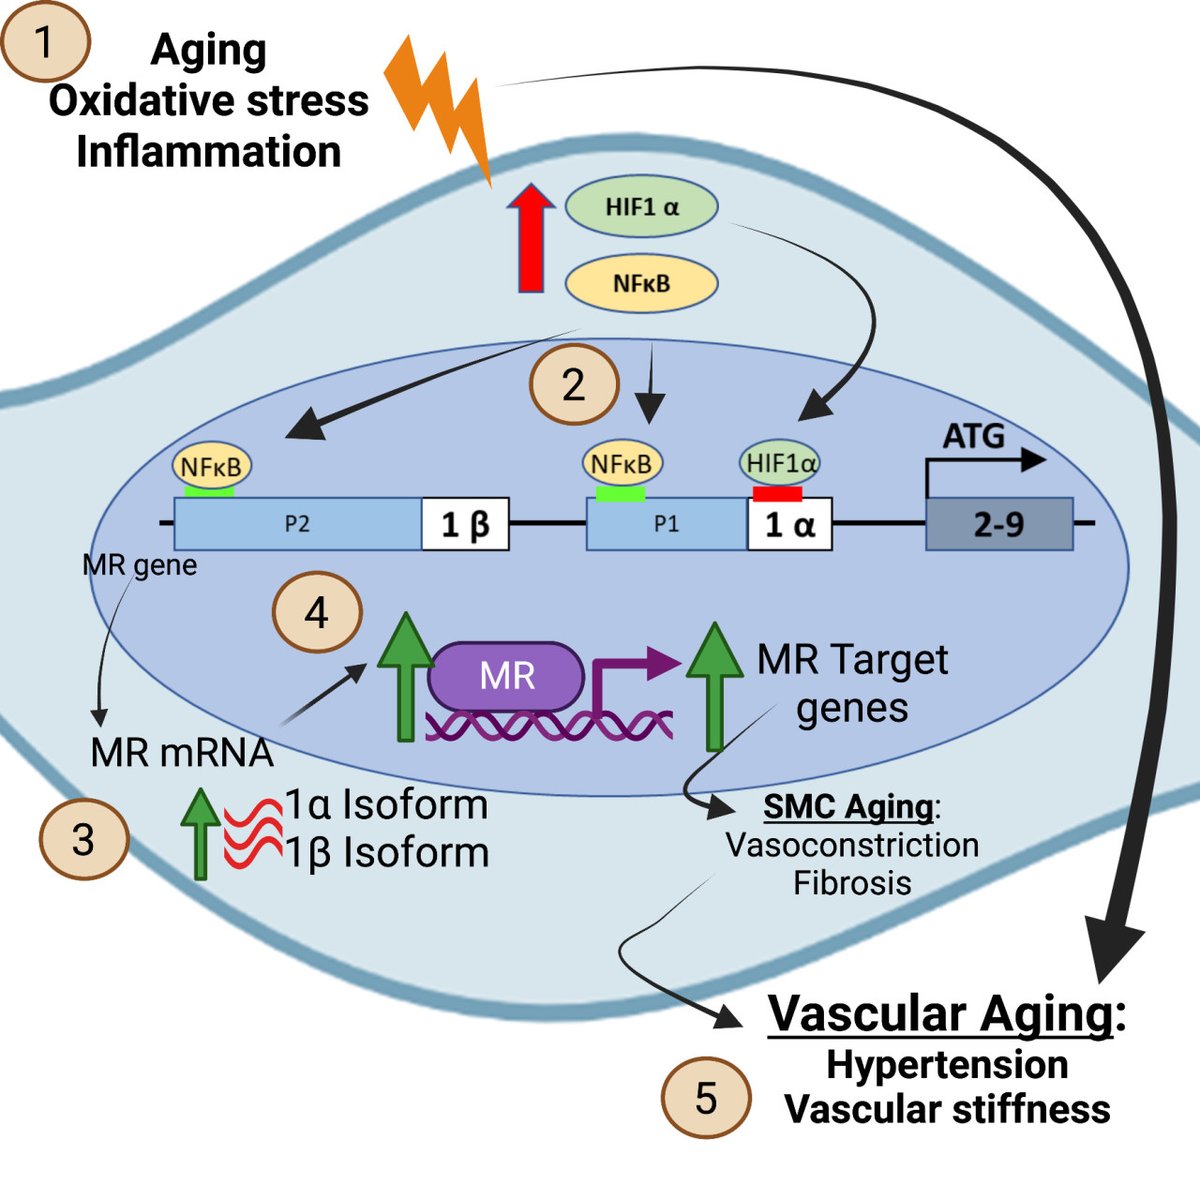 After 25 years, news re: mineralocorticoid receptor (MR) regulation. NFkB and HIF1a regulate MR in aging human vascular smooth muscle. Rising MR drives vascular aging even if the ligand aldosterone is not hi... @TuftsMCResearch @IrisJaffeLab @Jai_Ibarrola ahajrnls.org/3WgzzqA